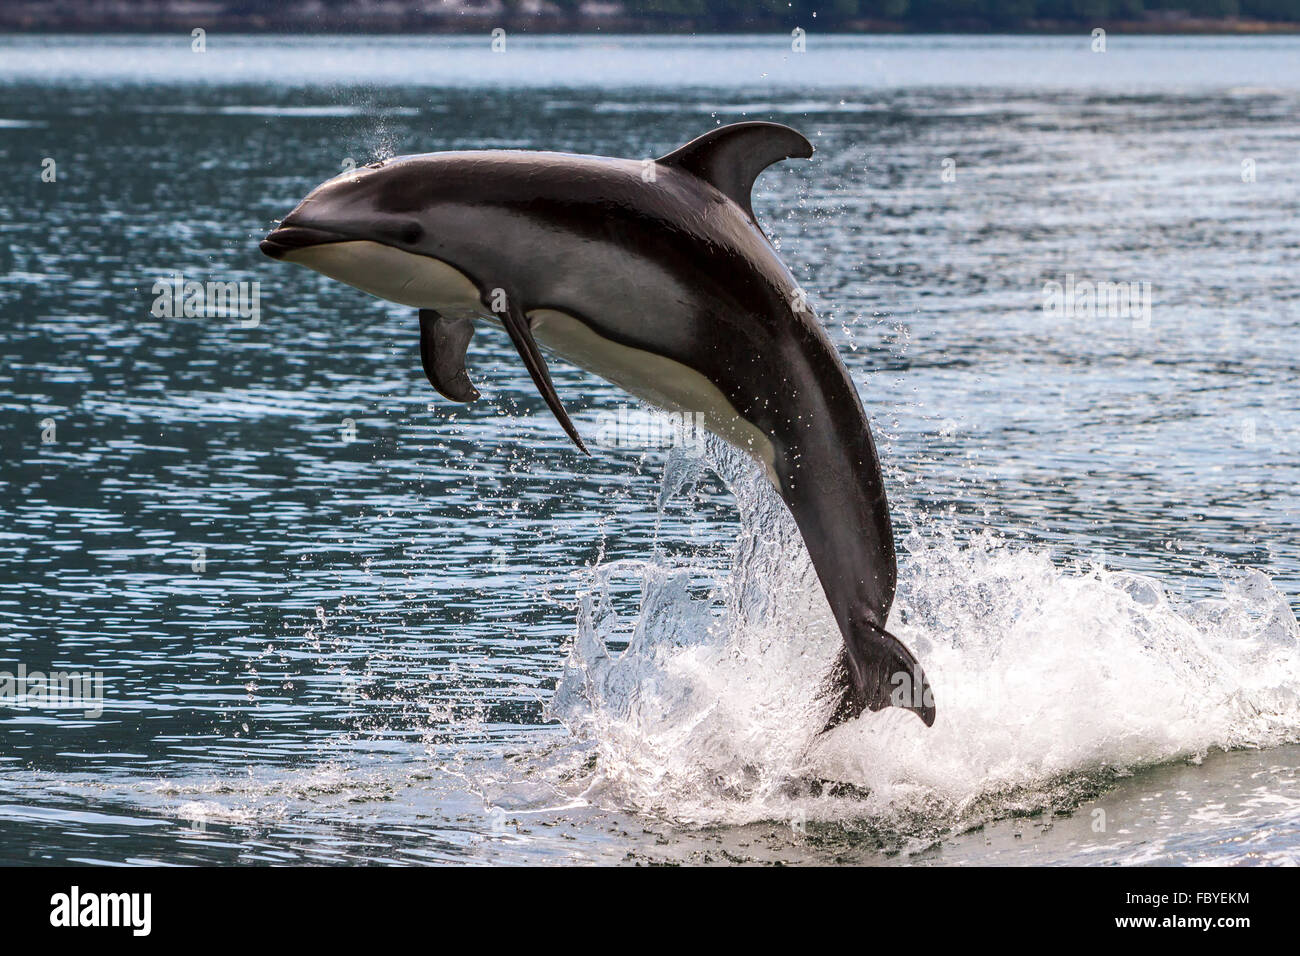 Pacific White Sided Dolphin (Lagenorhynchus obliquidens) jumping in Broughton Archipelago Marine Park in British Columbia, Canad Stock Photo